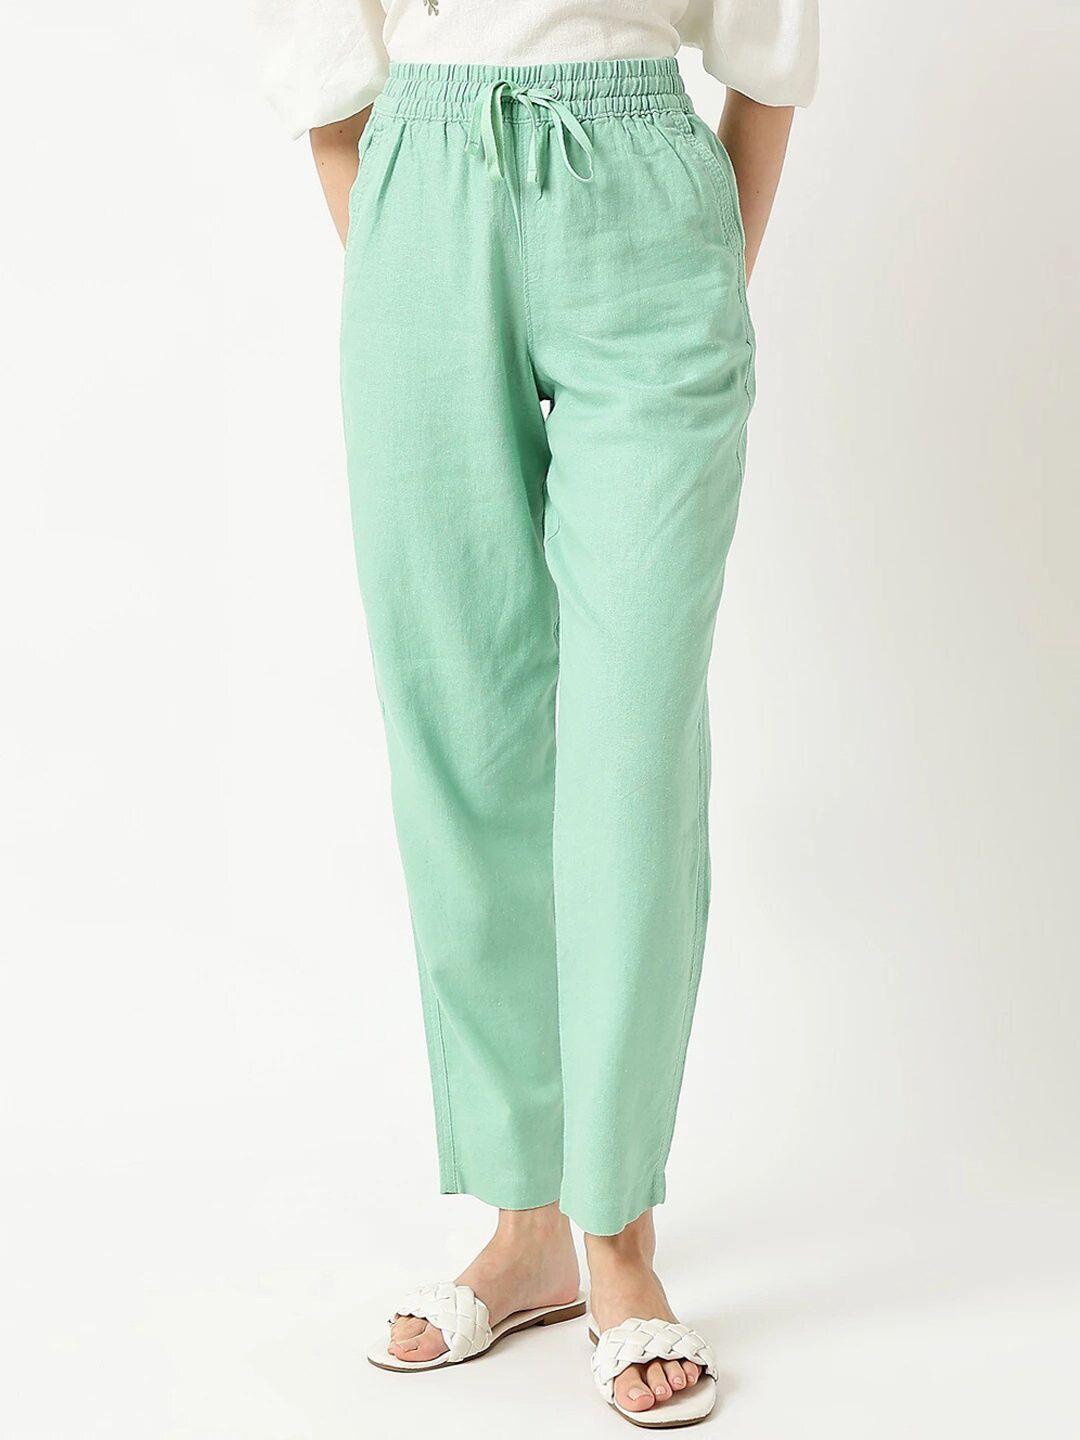 Marks & Spencer Women Tapered Fit High-Rise Trousers Price in India